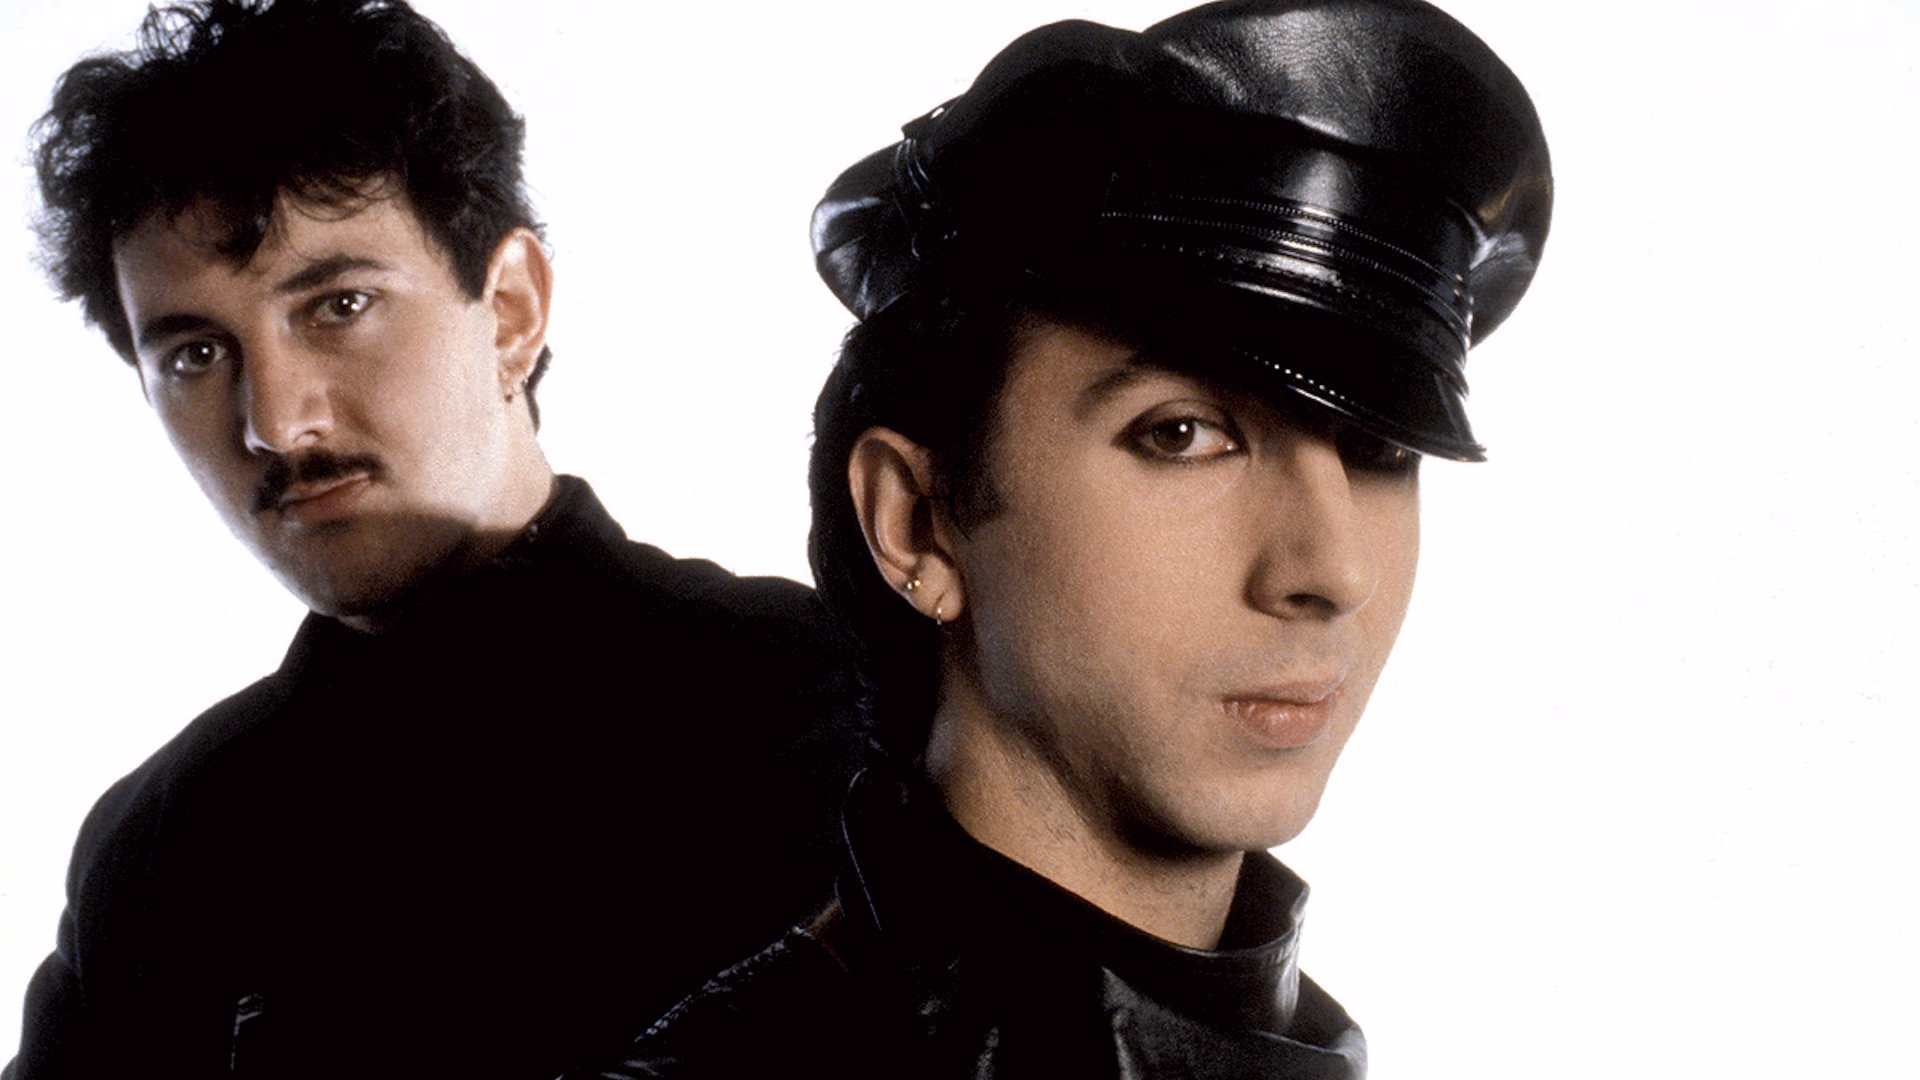 Tainted Love/Where Did Our Love Go av Soft Cell